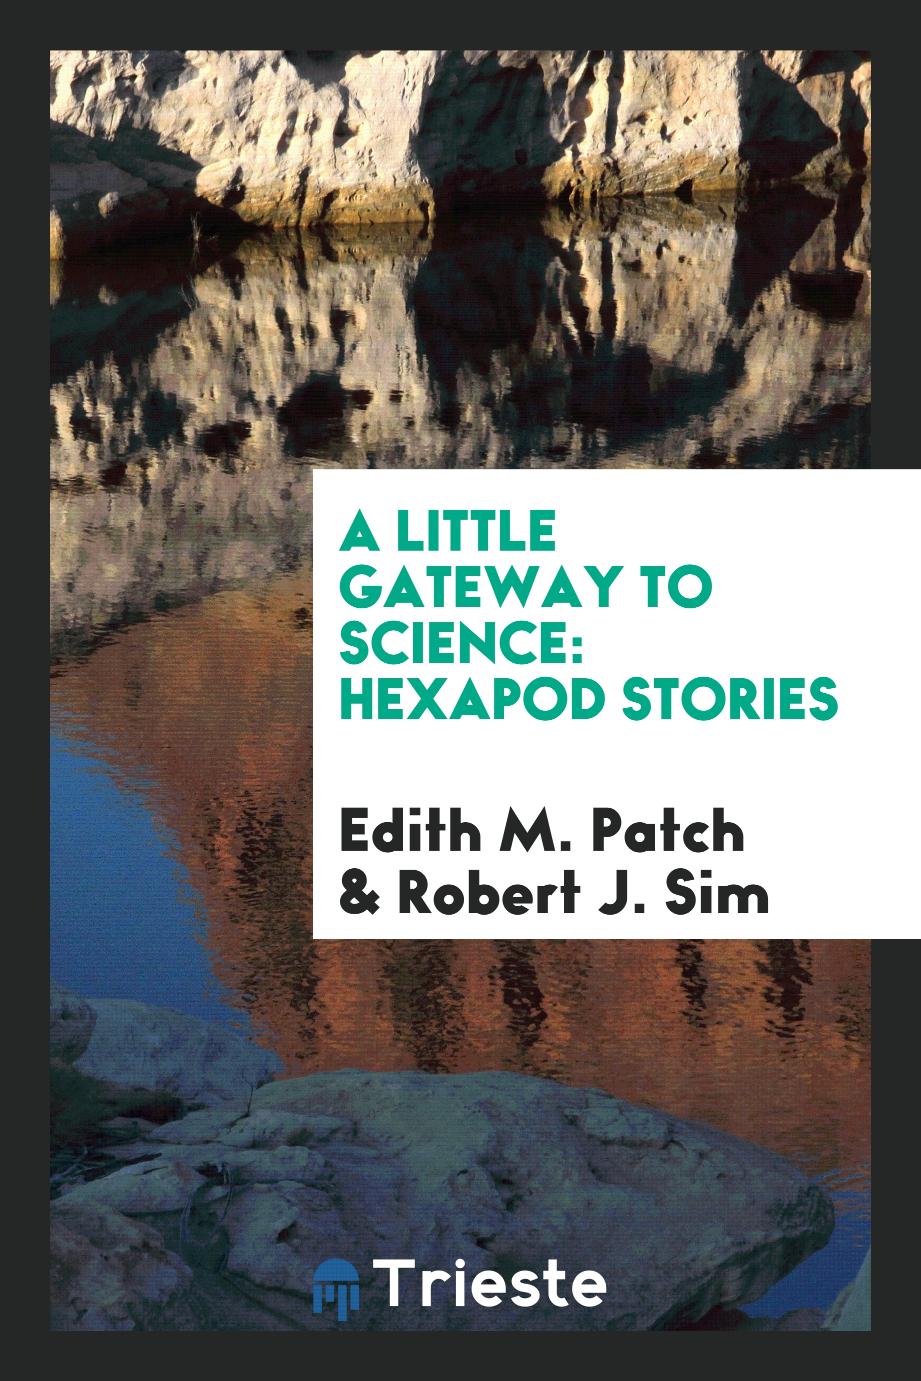 A Little Gateway to Science: Hexapod Stories